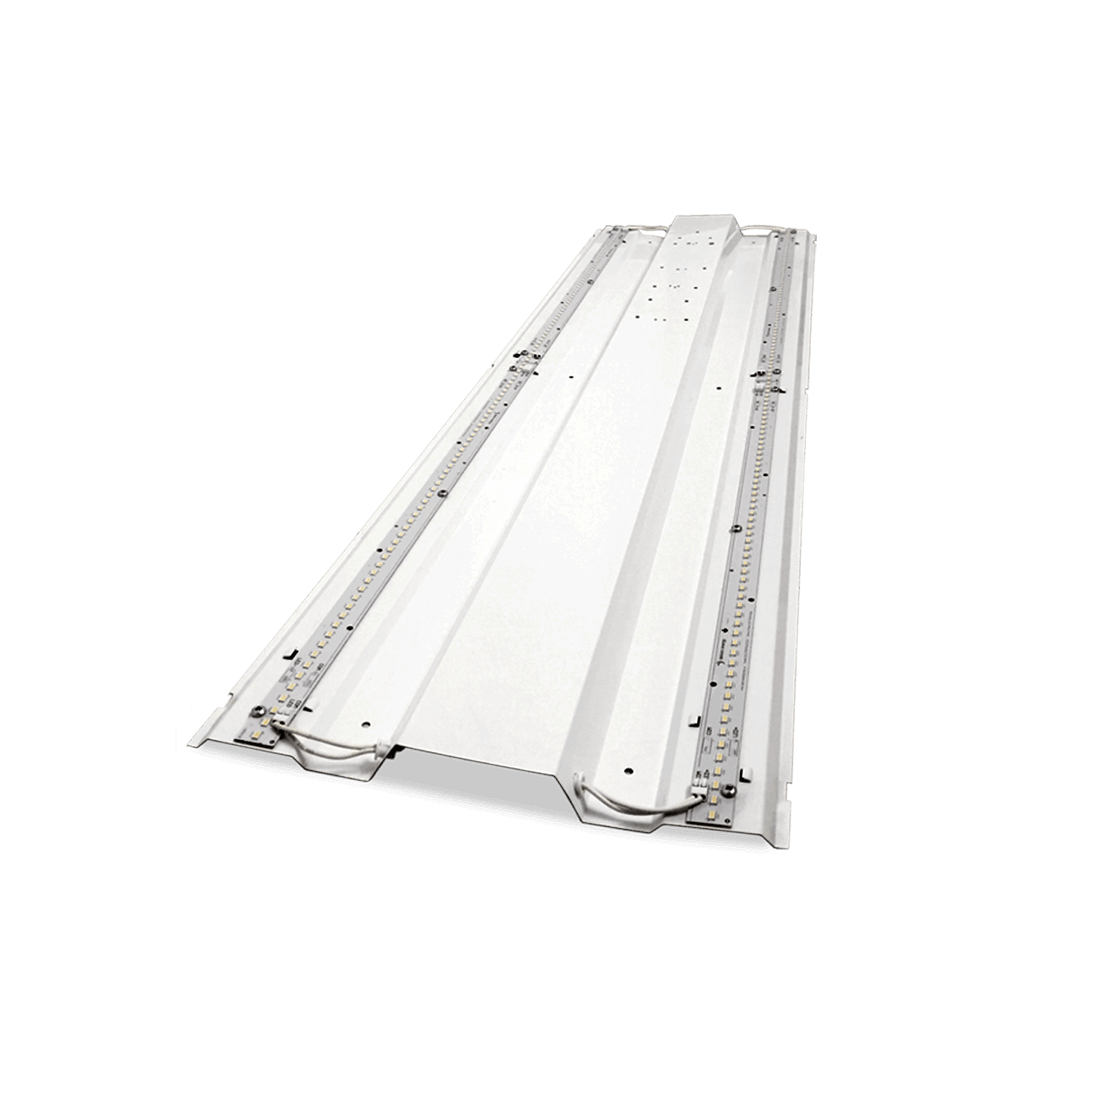 2x4 steel troffer style light fixture with 4 exposed LED boards